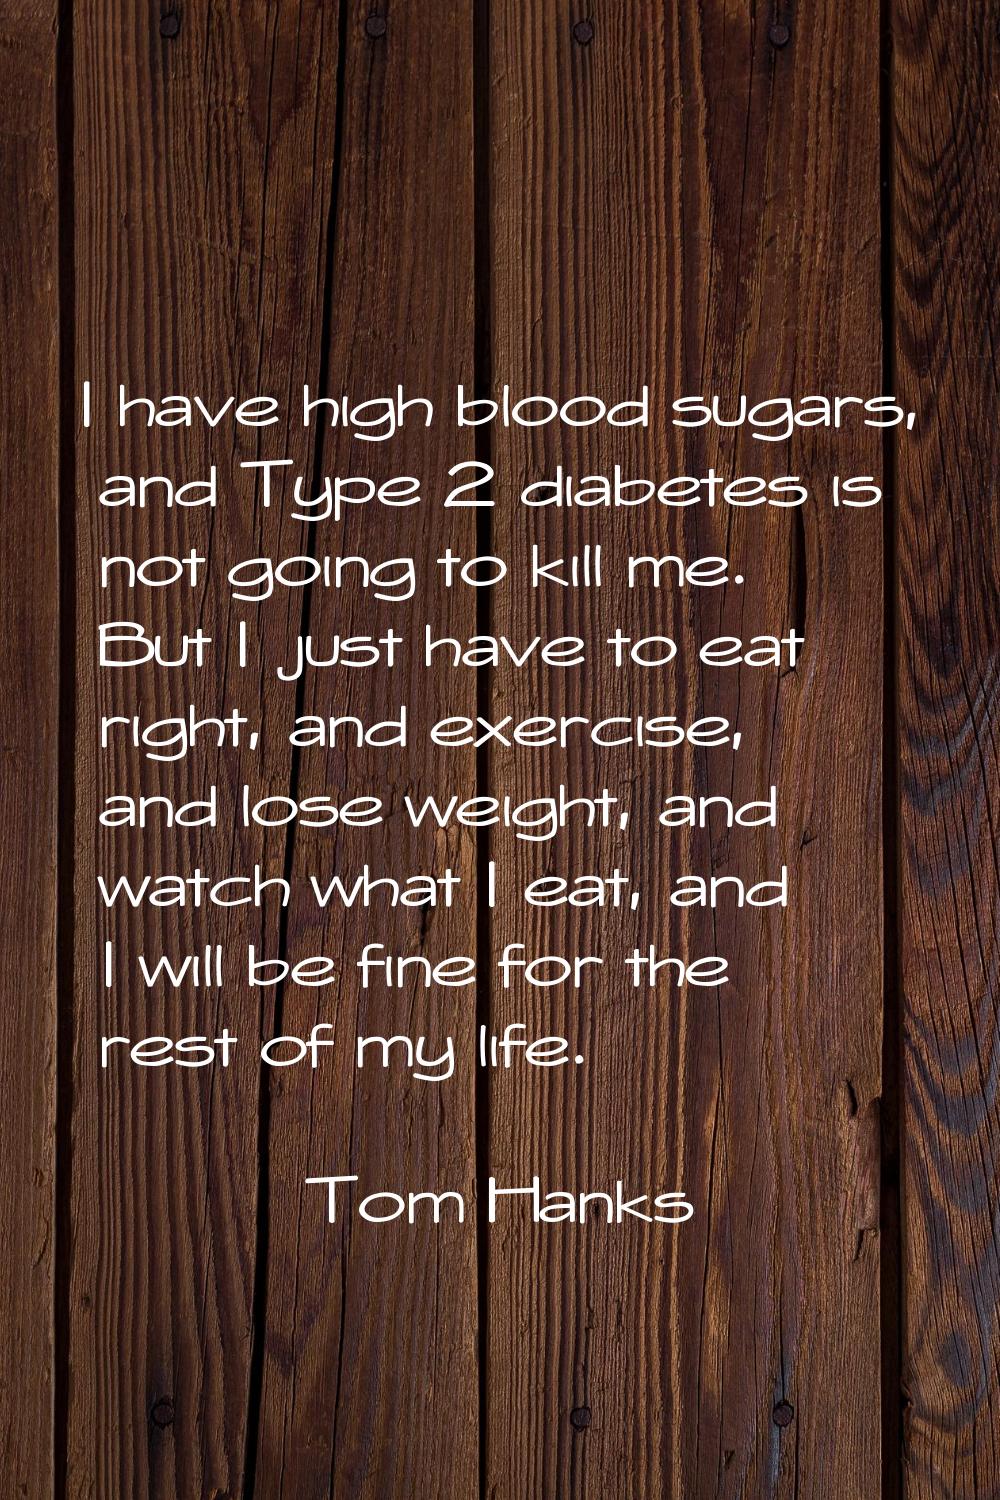 I have high blood sugars, and Type 2 diabetes is not going to kill me. But I just have to eat right